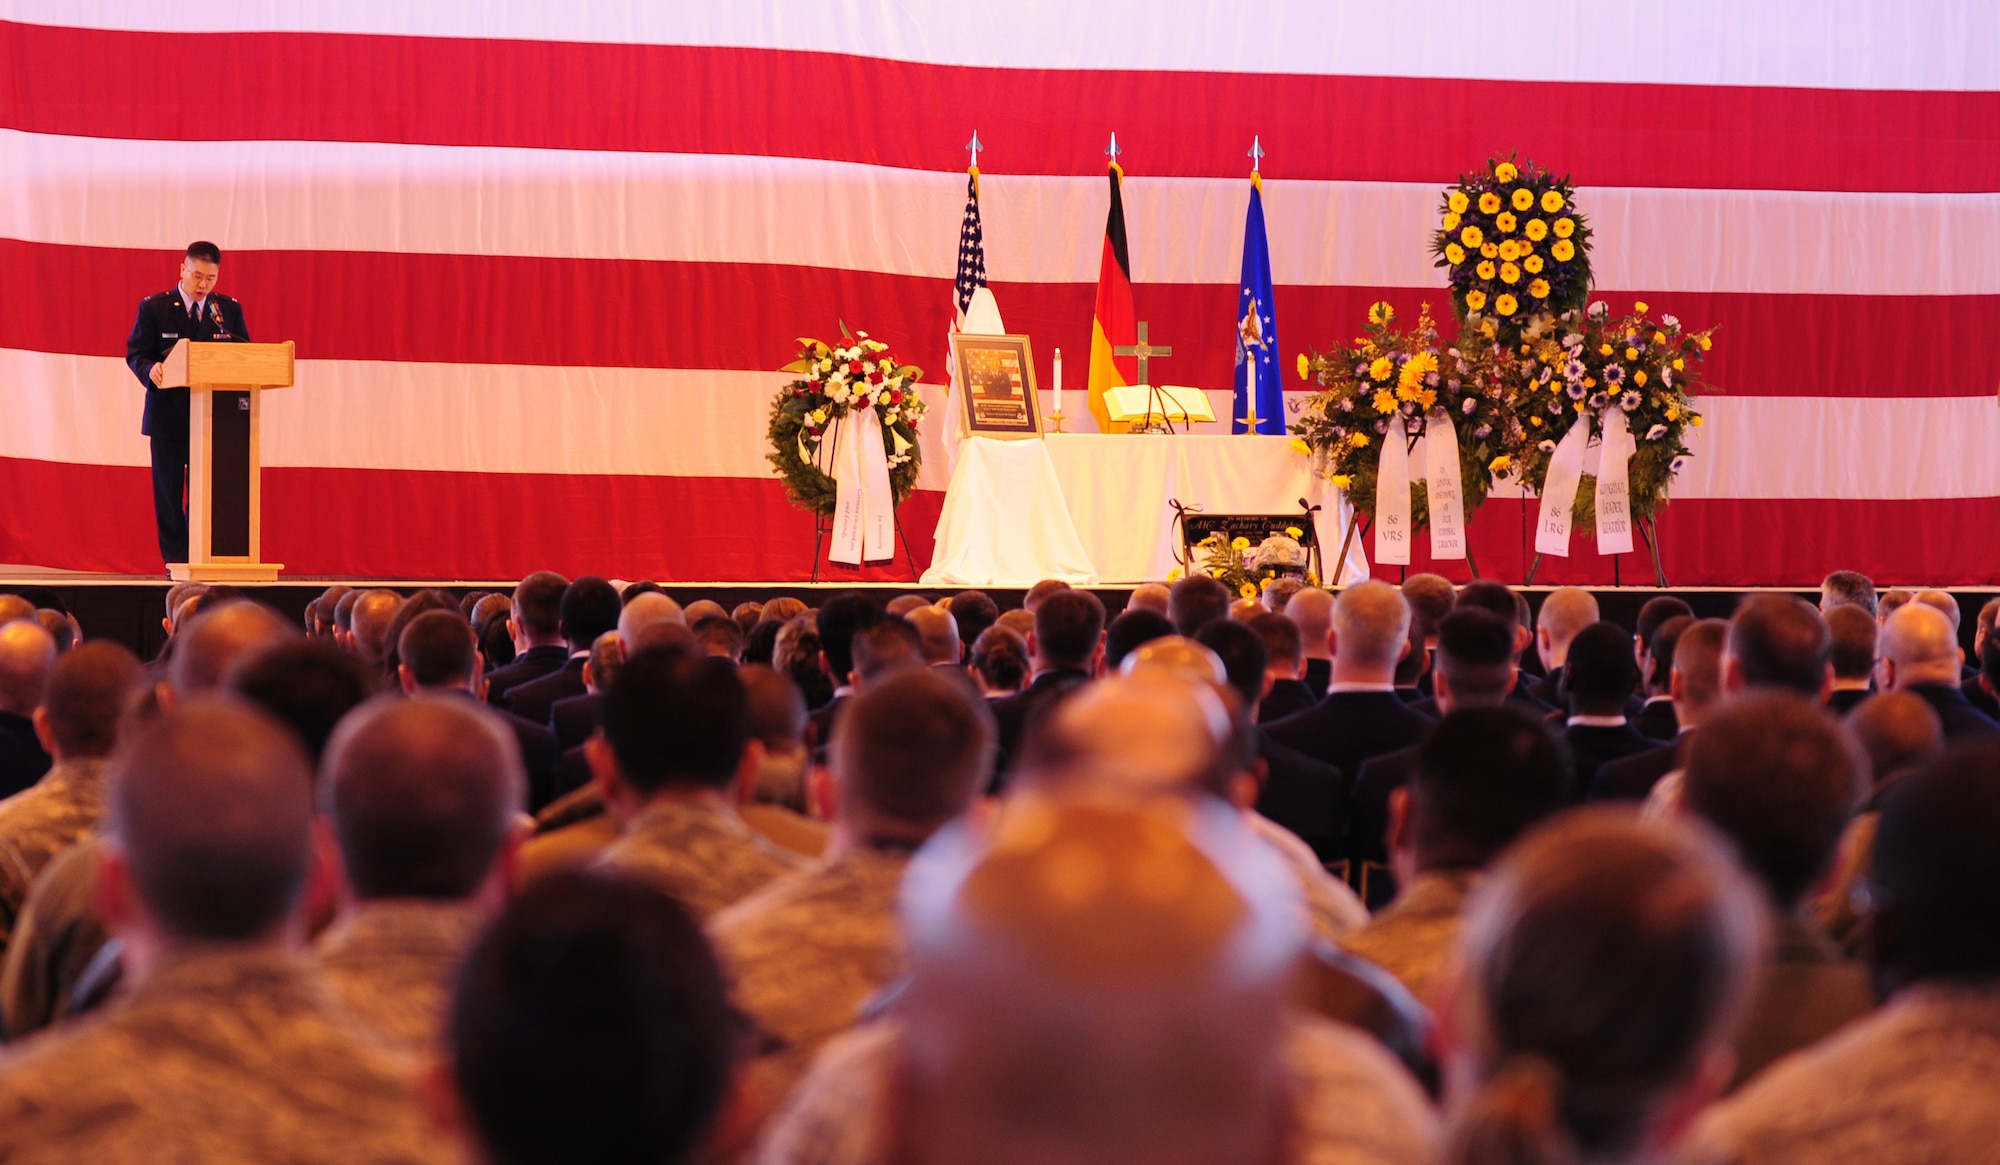 U.S. Air Force Capt. David Suh, 86th Airlift Wing chaplain, presides over a memorial ceremony for Airman 1st Class Zachary Cuddeback, 86th Vehicle Readiness Squadron, Ramstein Air Base, Germany, March 10, 2011. Airman Cuddeback was killed in action at Frankfurt International Airport March 2, 2011. (U.S. Air Force photo by Senior Airman Brittany Perry)